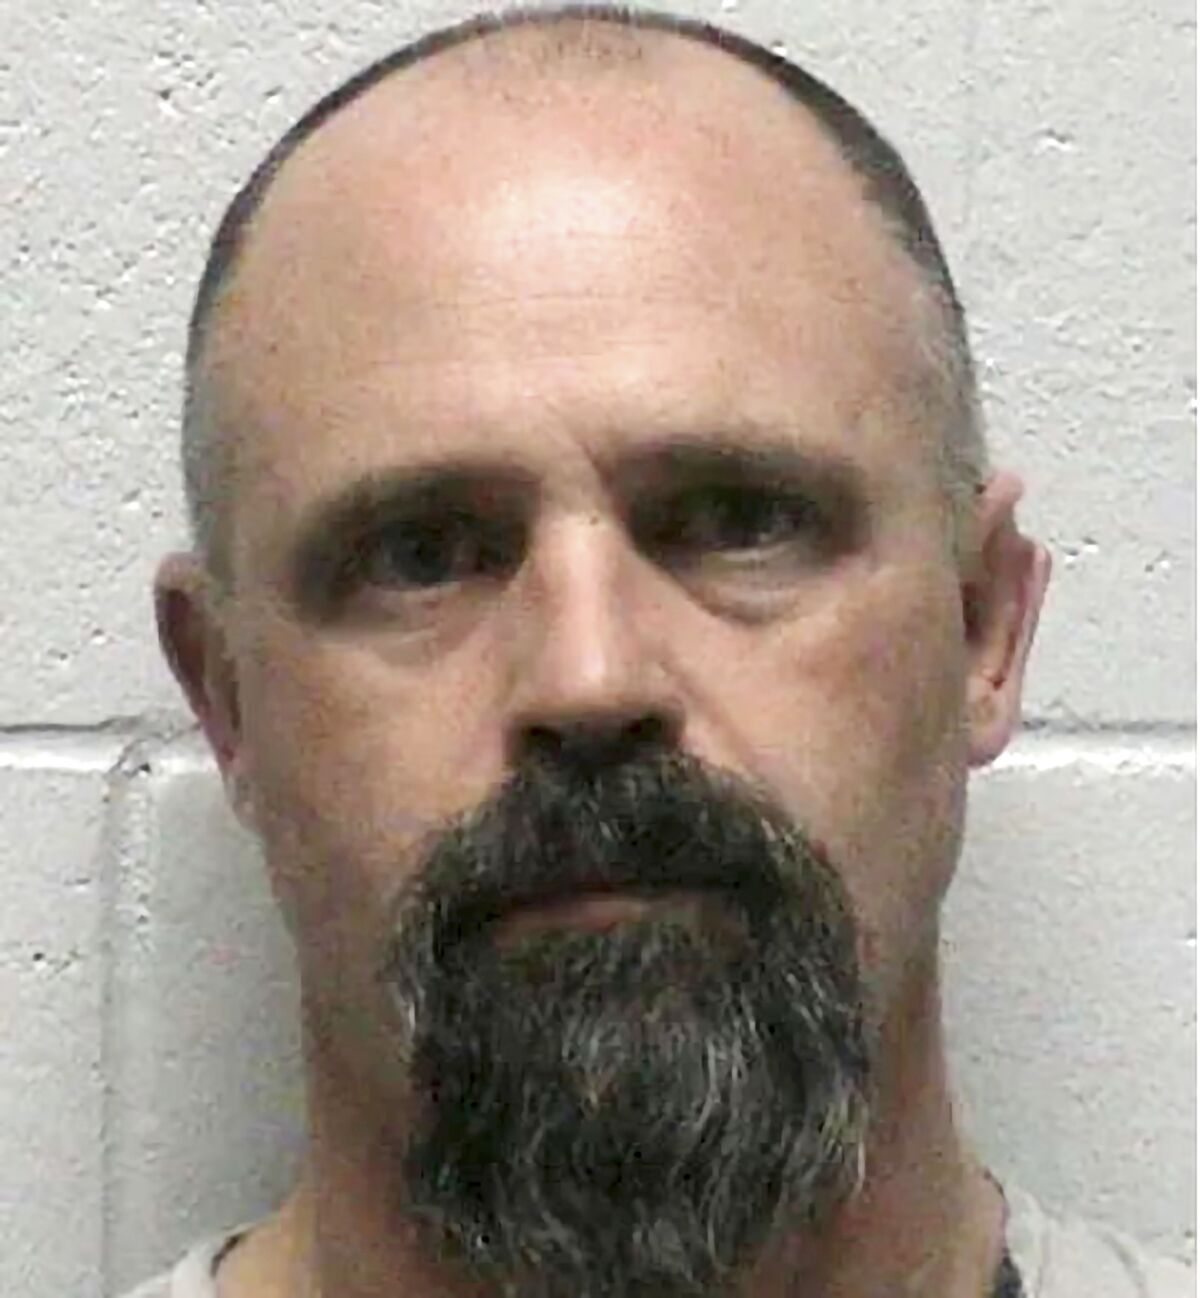 FILE - This photo provided by Lyon County Detention Center shows Troy Driver, 41, of Fallon, Nev., following his arrest Friday, March 25, 2022. A pretrial hearing for Driver has been postponed. He is accused of kidnapping and killing an 18-year-old woman whose body was found buried in northern Nevada's high desert more than two weeks after prosecutors say he abducted her from a Walmart parking lot. (Lyon County Sheriff's Office via AP, File)